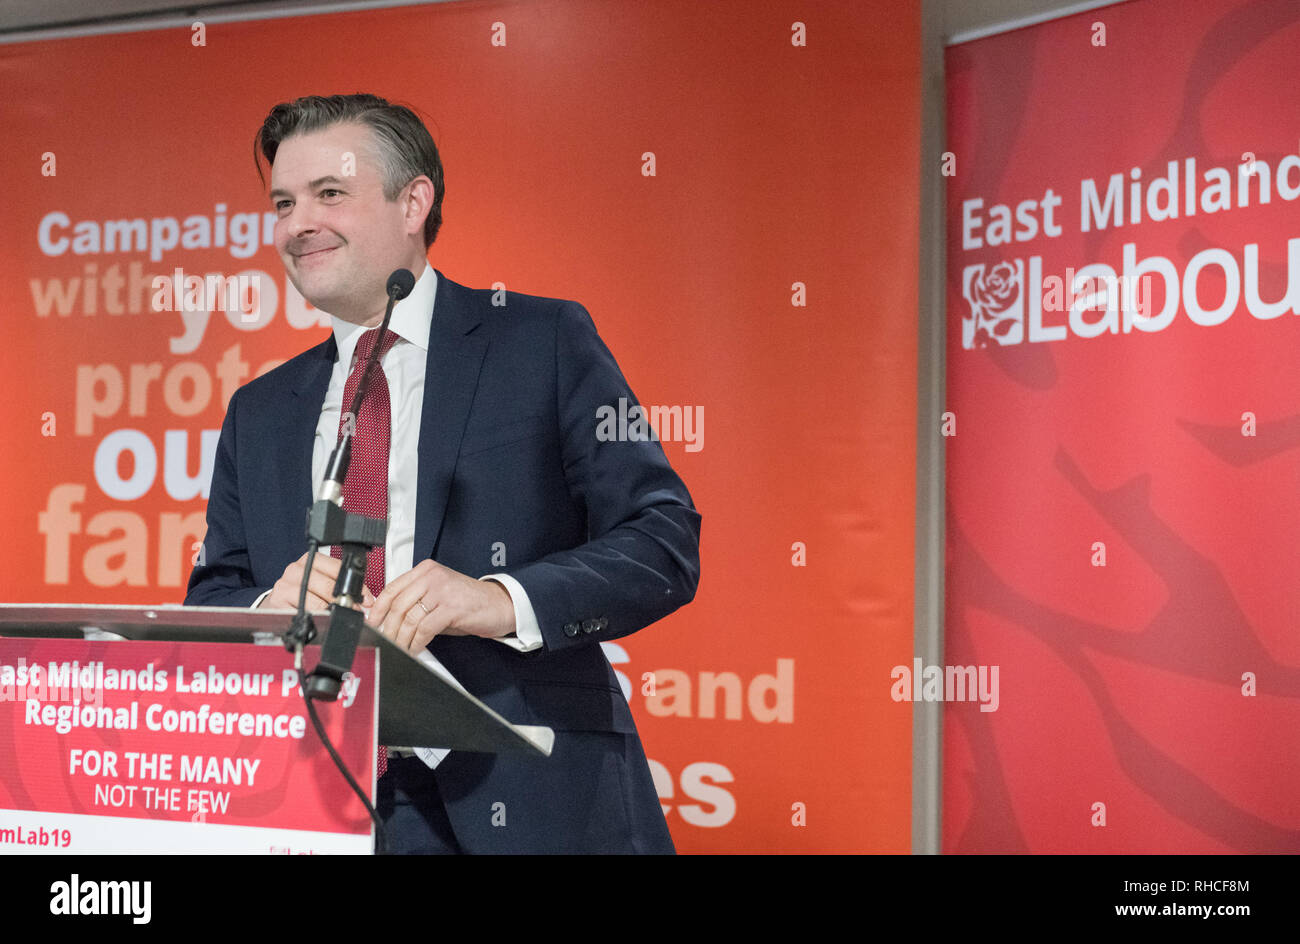 Nottinghamshire, England, UK. 2nd February 2019. East Midlands Labour Party Conference 2019, Nottingham, Nottinghamshire, England, UK. 2nd. February, 2019. Labour’s Shadow Secretary of State for Health and Social Care Jon Ashworth M.P. debating the Labour Party Policy on the National Health Service with party members at the East Midlands Labour Party Conference 2019. Alan Beastall/Alamy Live News Stock Photo